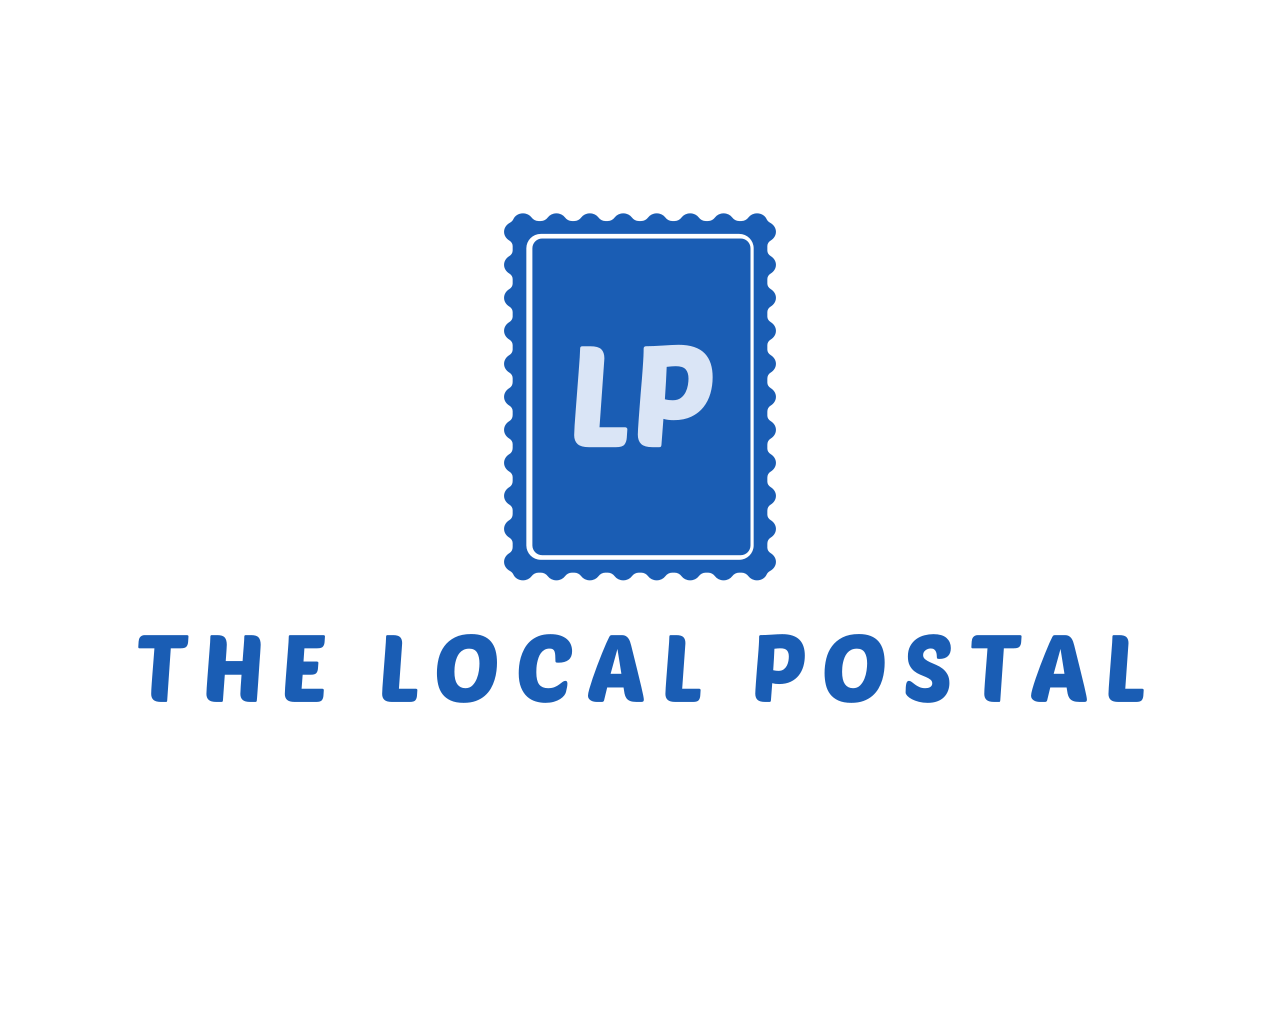 The Local Postal